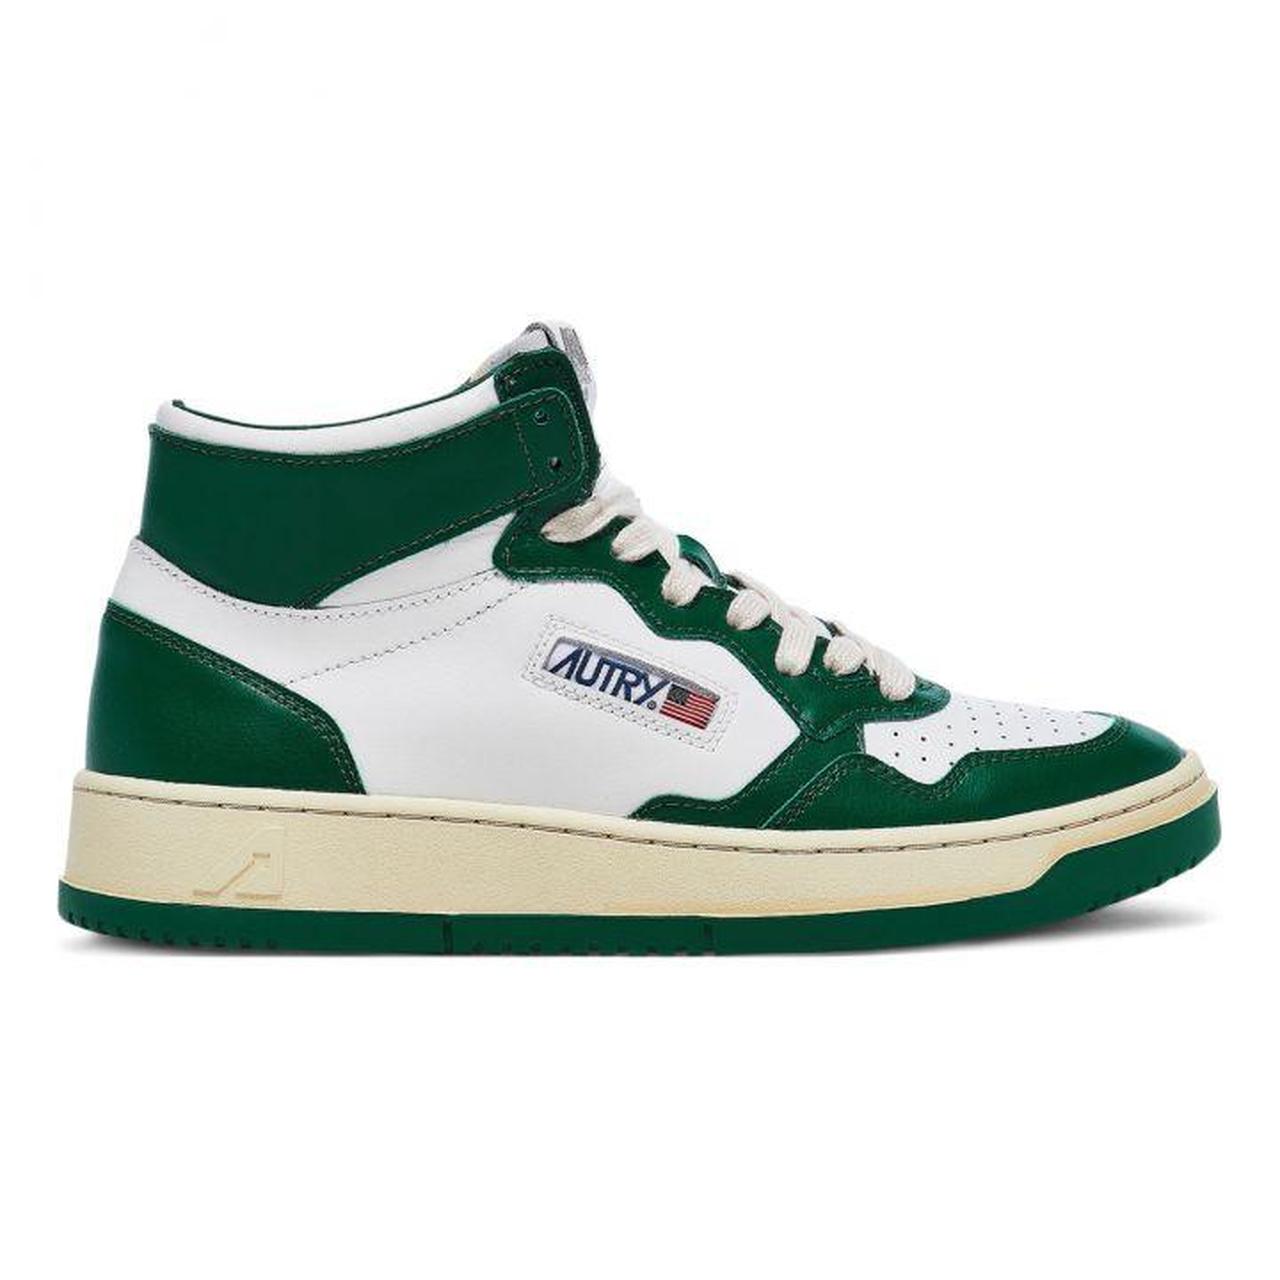 Autry Women's Green and White Trainers (3)